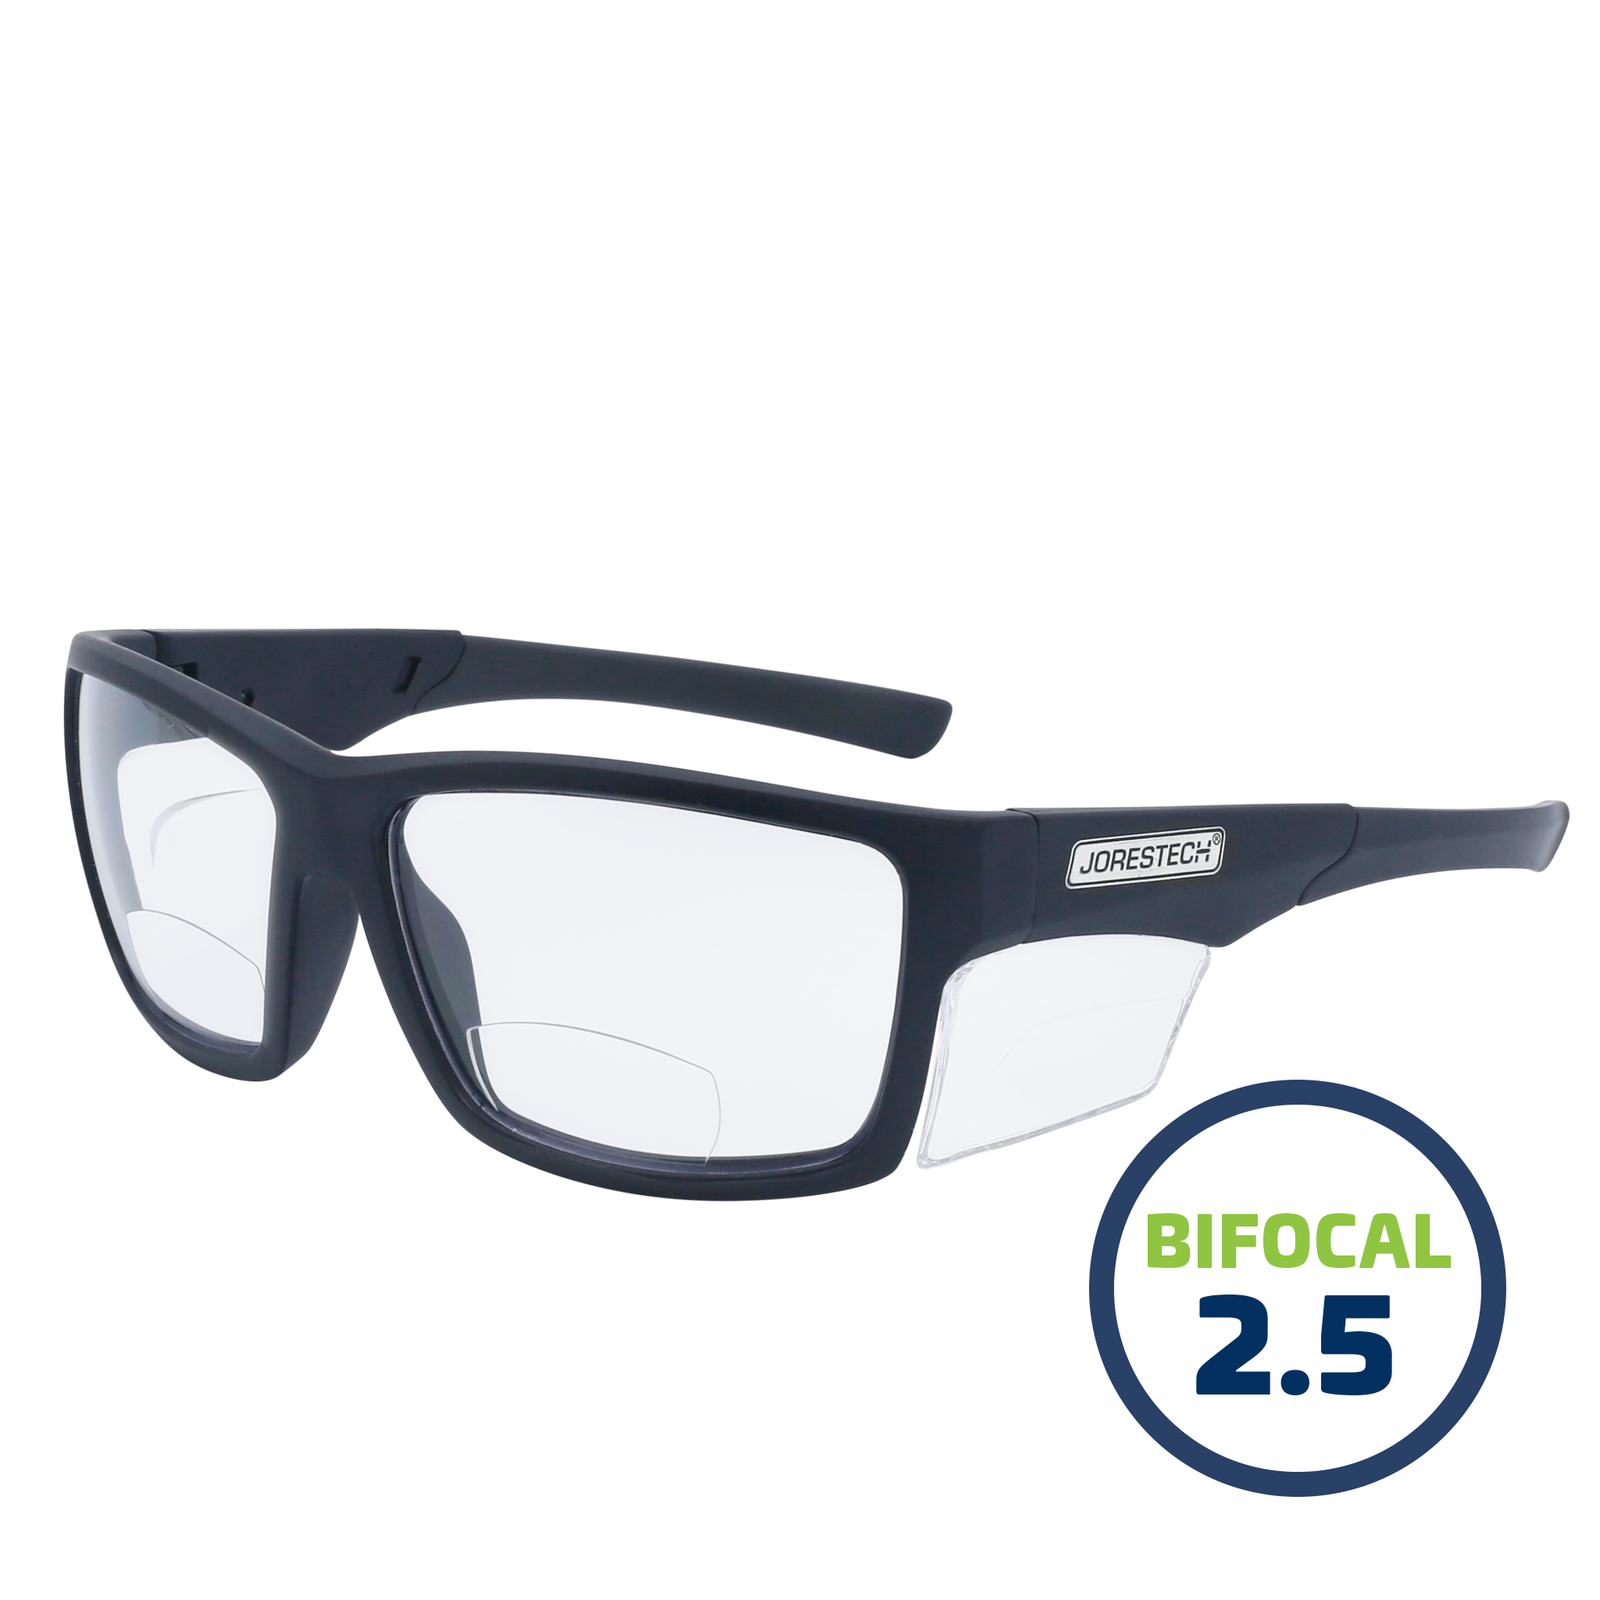 A bifocal safety reader JORESTECH Glasses with clear side shield for high impact protection. These safety glasses have black frame and clear polycarbonate lenses. In a green, blue and white drawing it reads bifocal 2.5. Background is white.